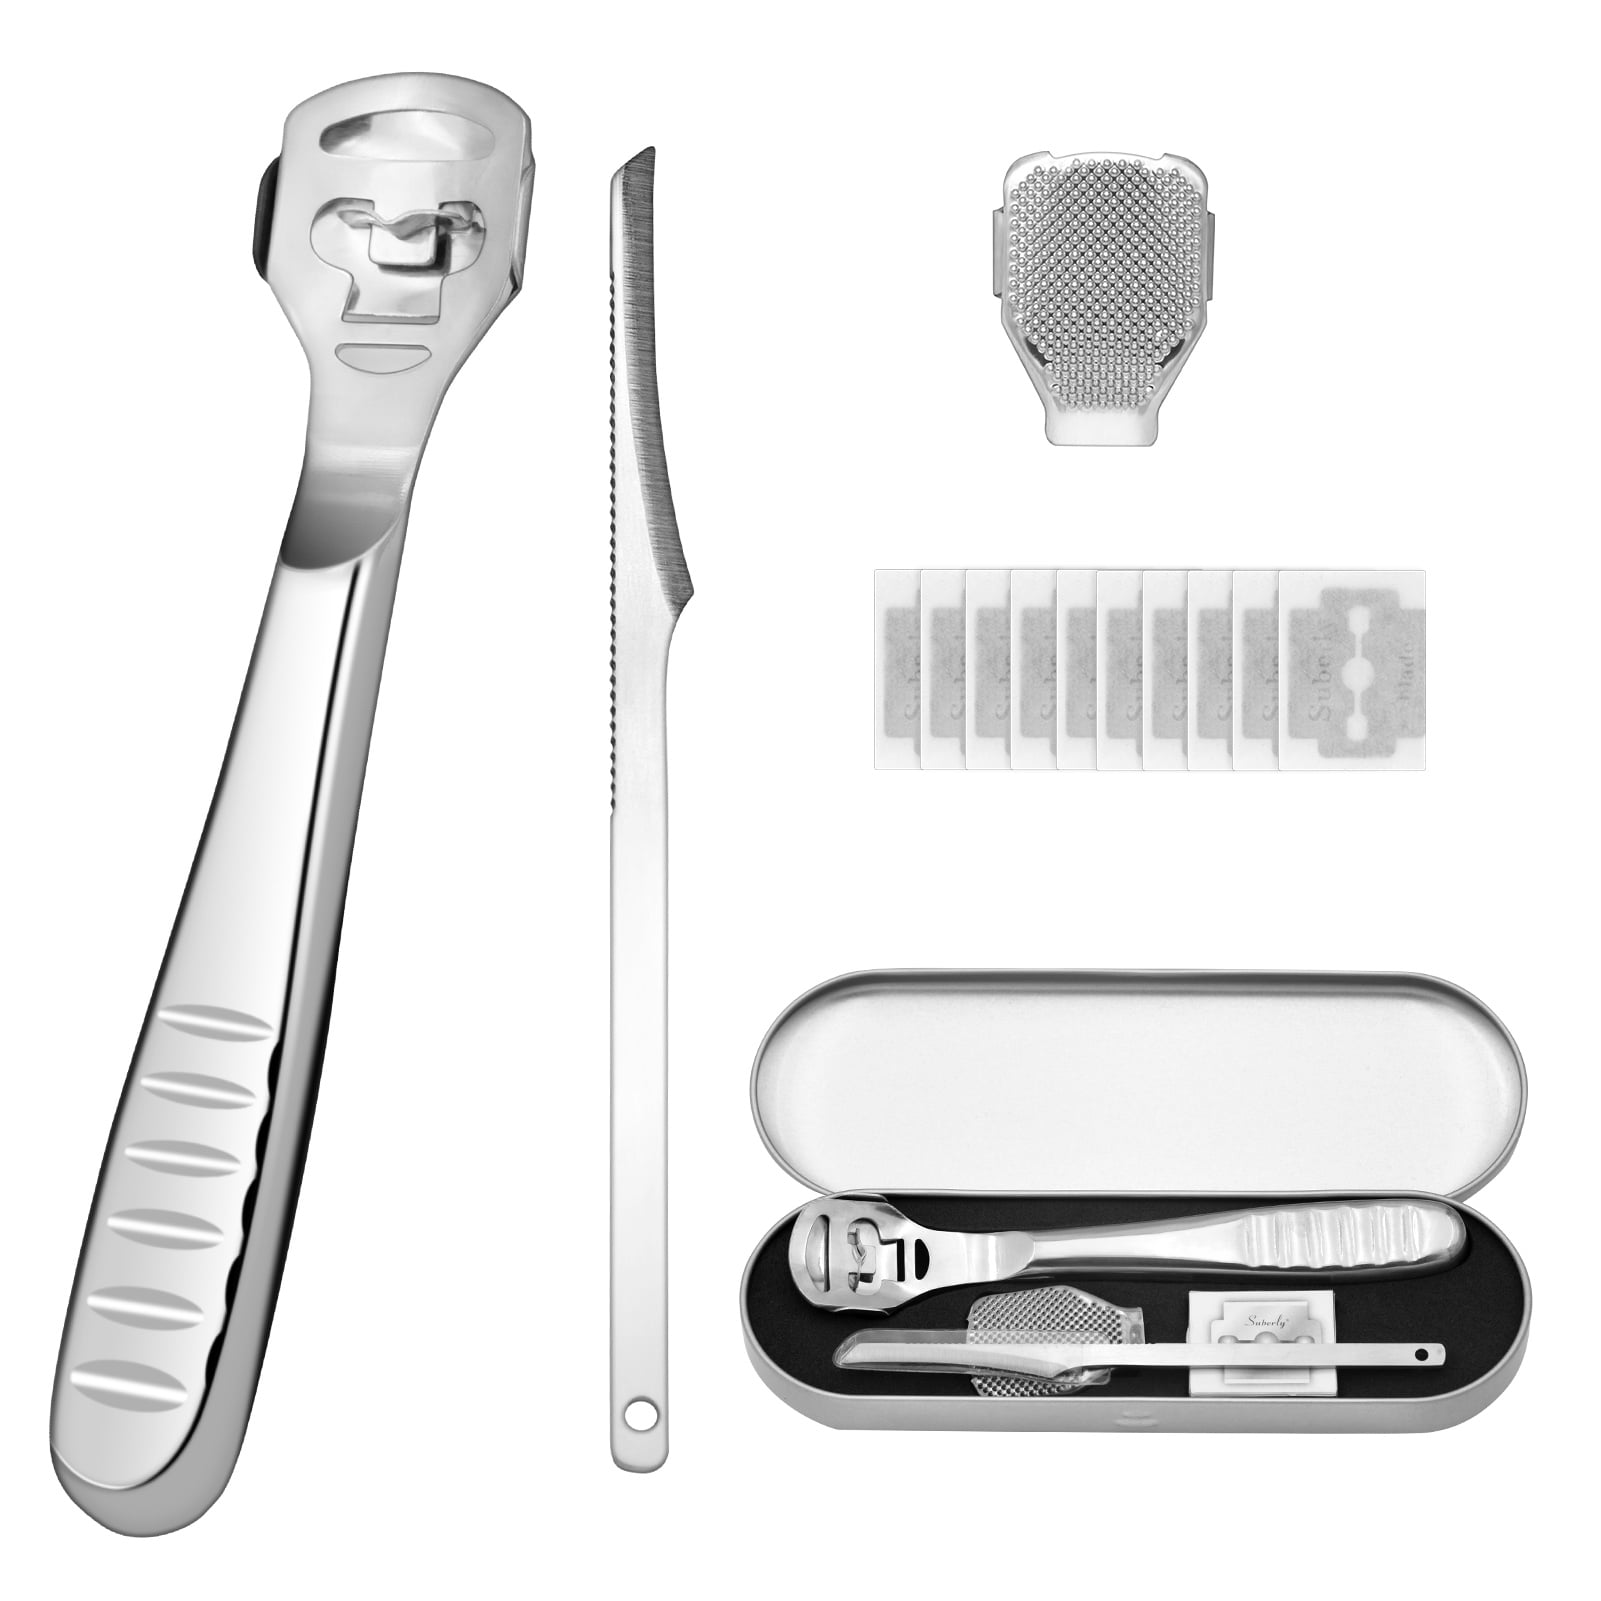 52 Pcs Callus Shaver Set,1 Stainless Steel Foot Razor with 50 Replacement  Slices Blades and 1 Foot File Head Foot Care Tools,Foot Shaver Callus